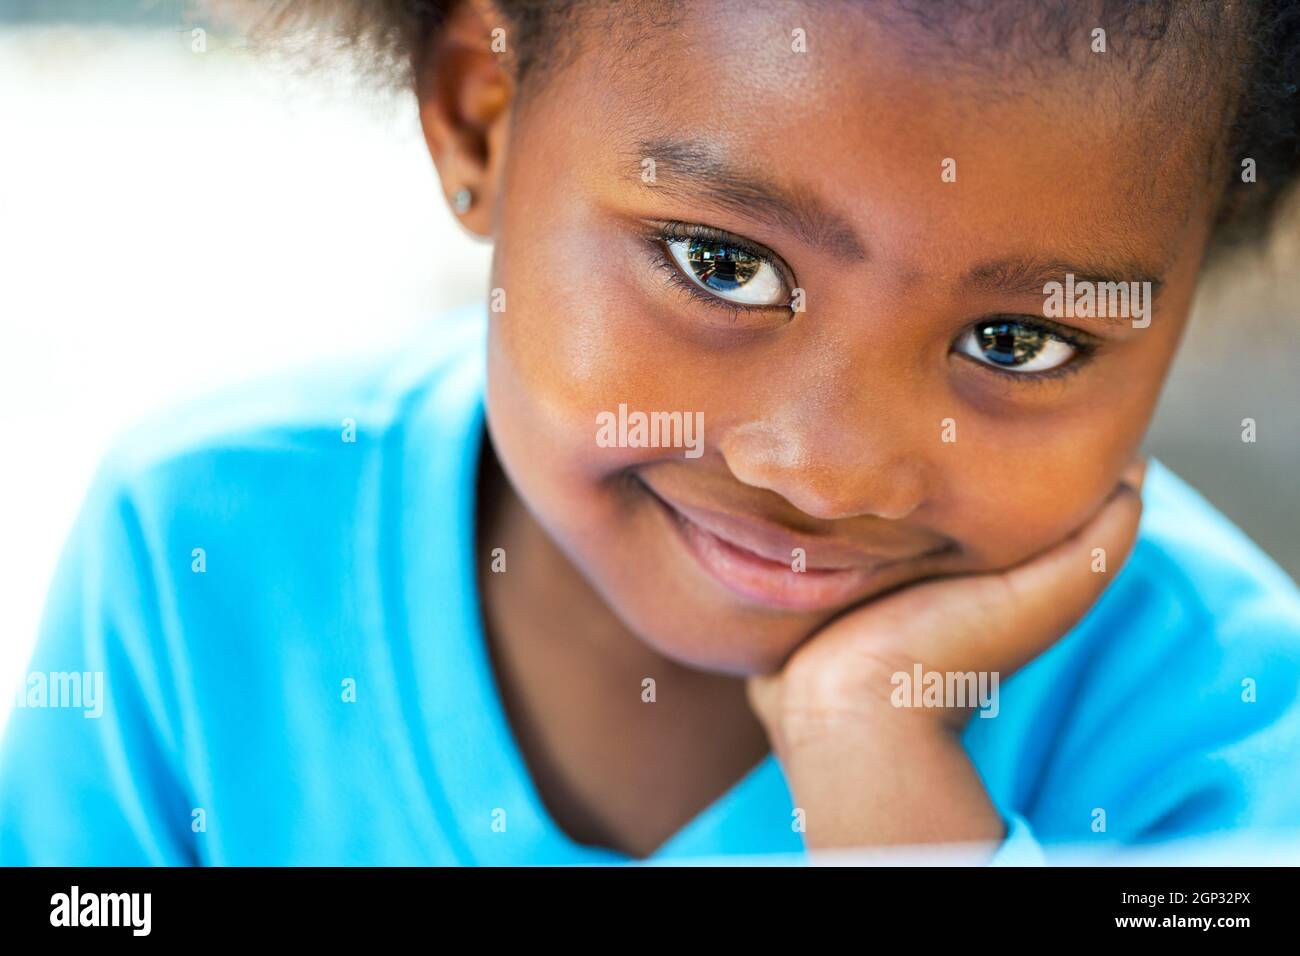 Facial portrait of cute African girl resting cheek on hand. Stock Photo